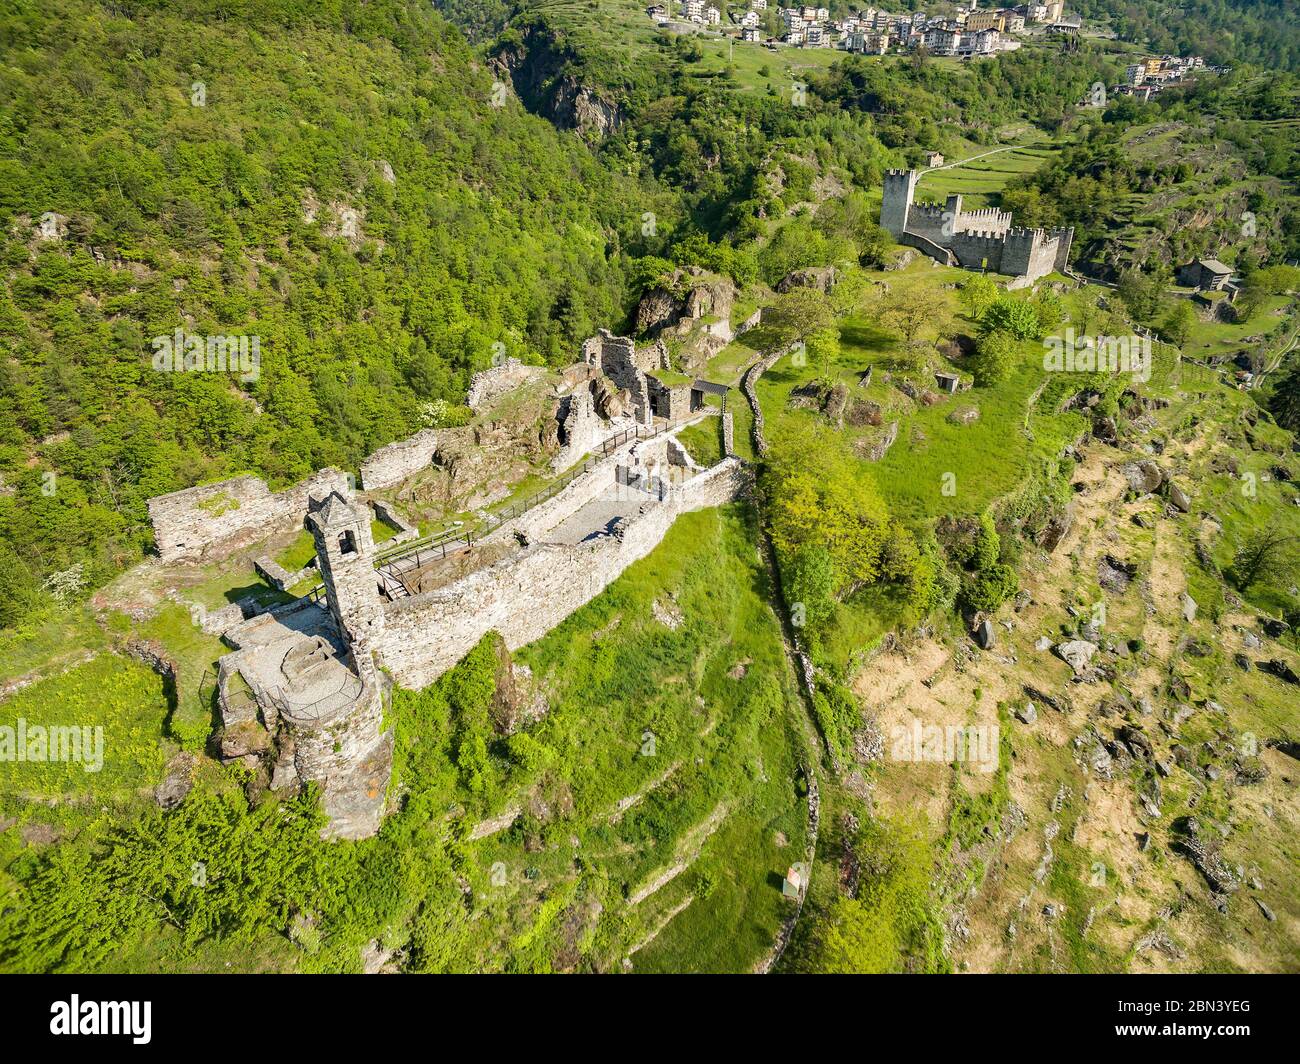 Grosio - Valtellina (IT) - New Castle and San Faustino - Park of Rupestrian incisions - aerial view Stock Photo